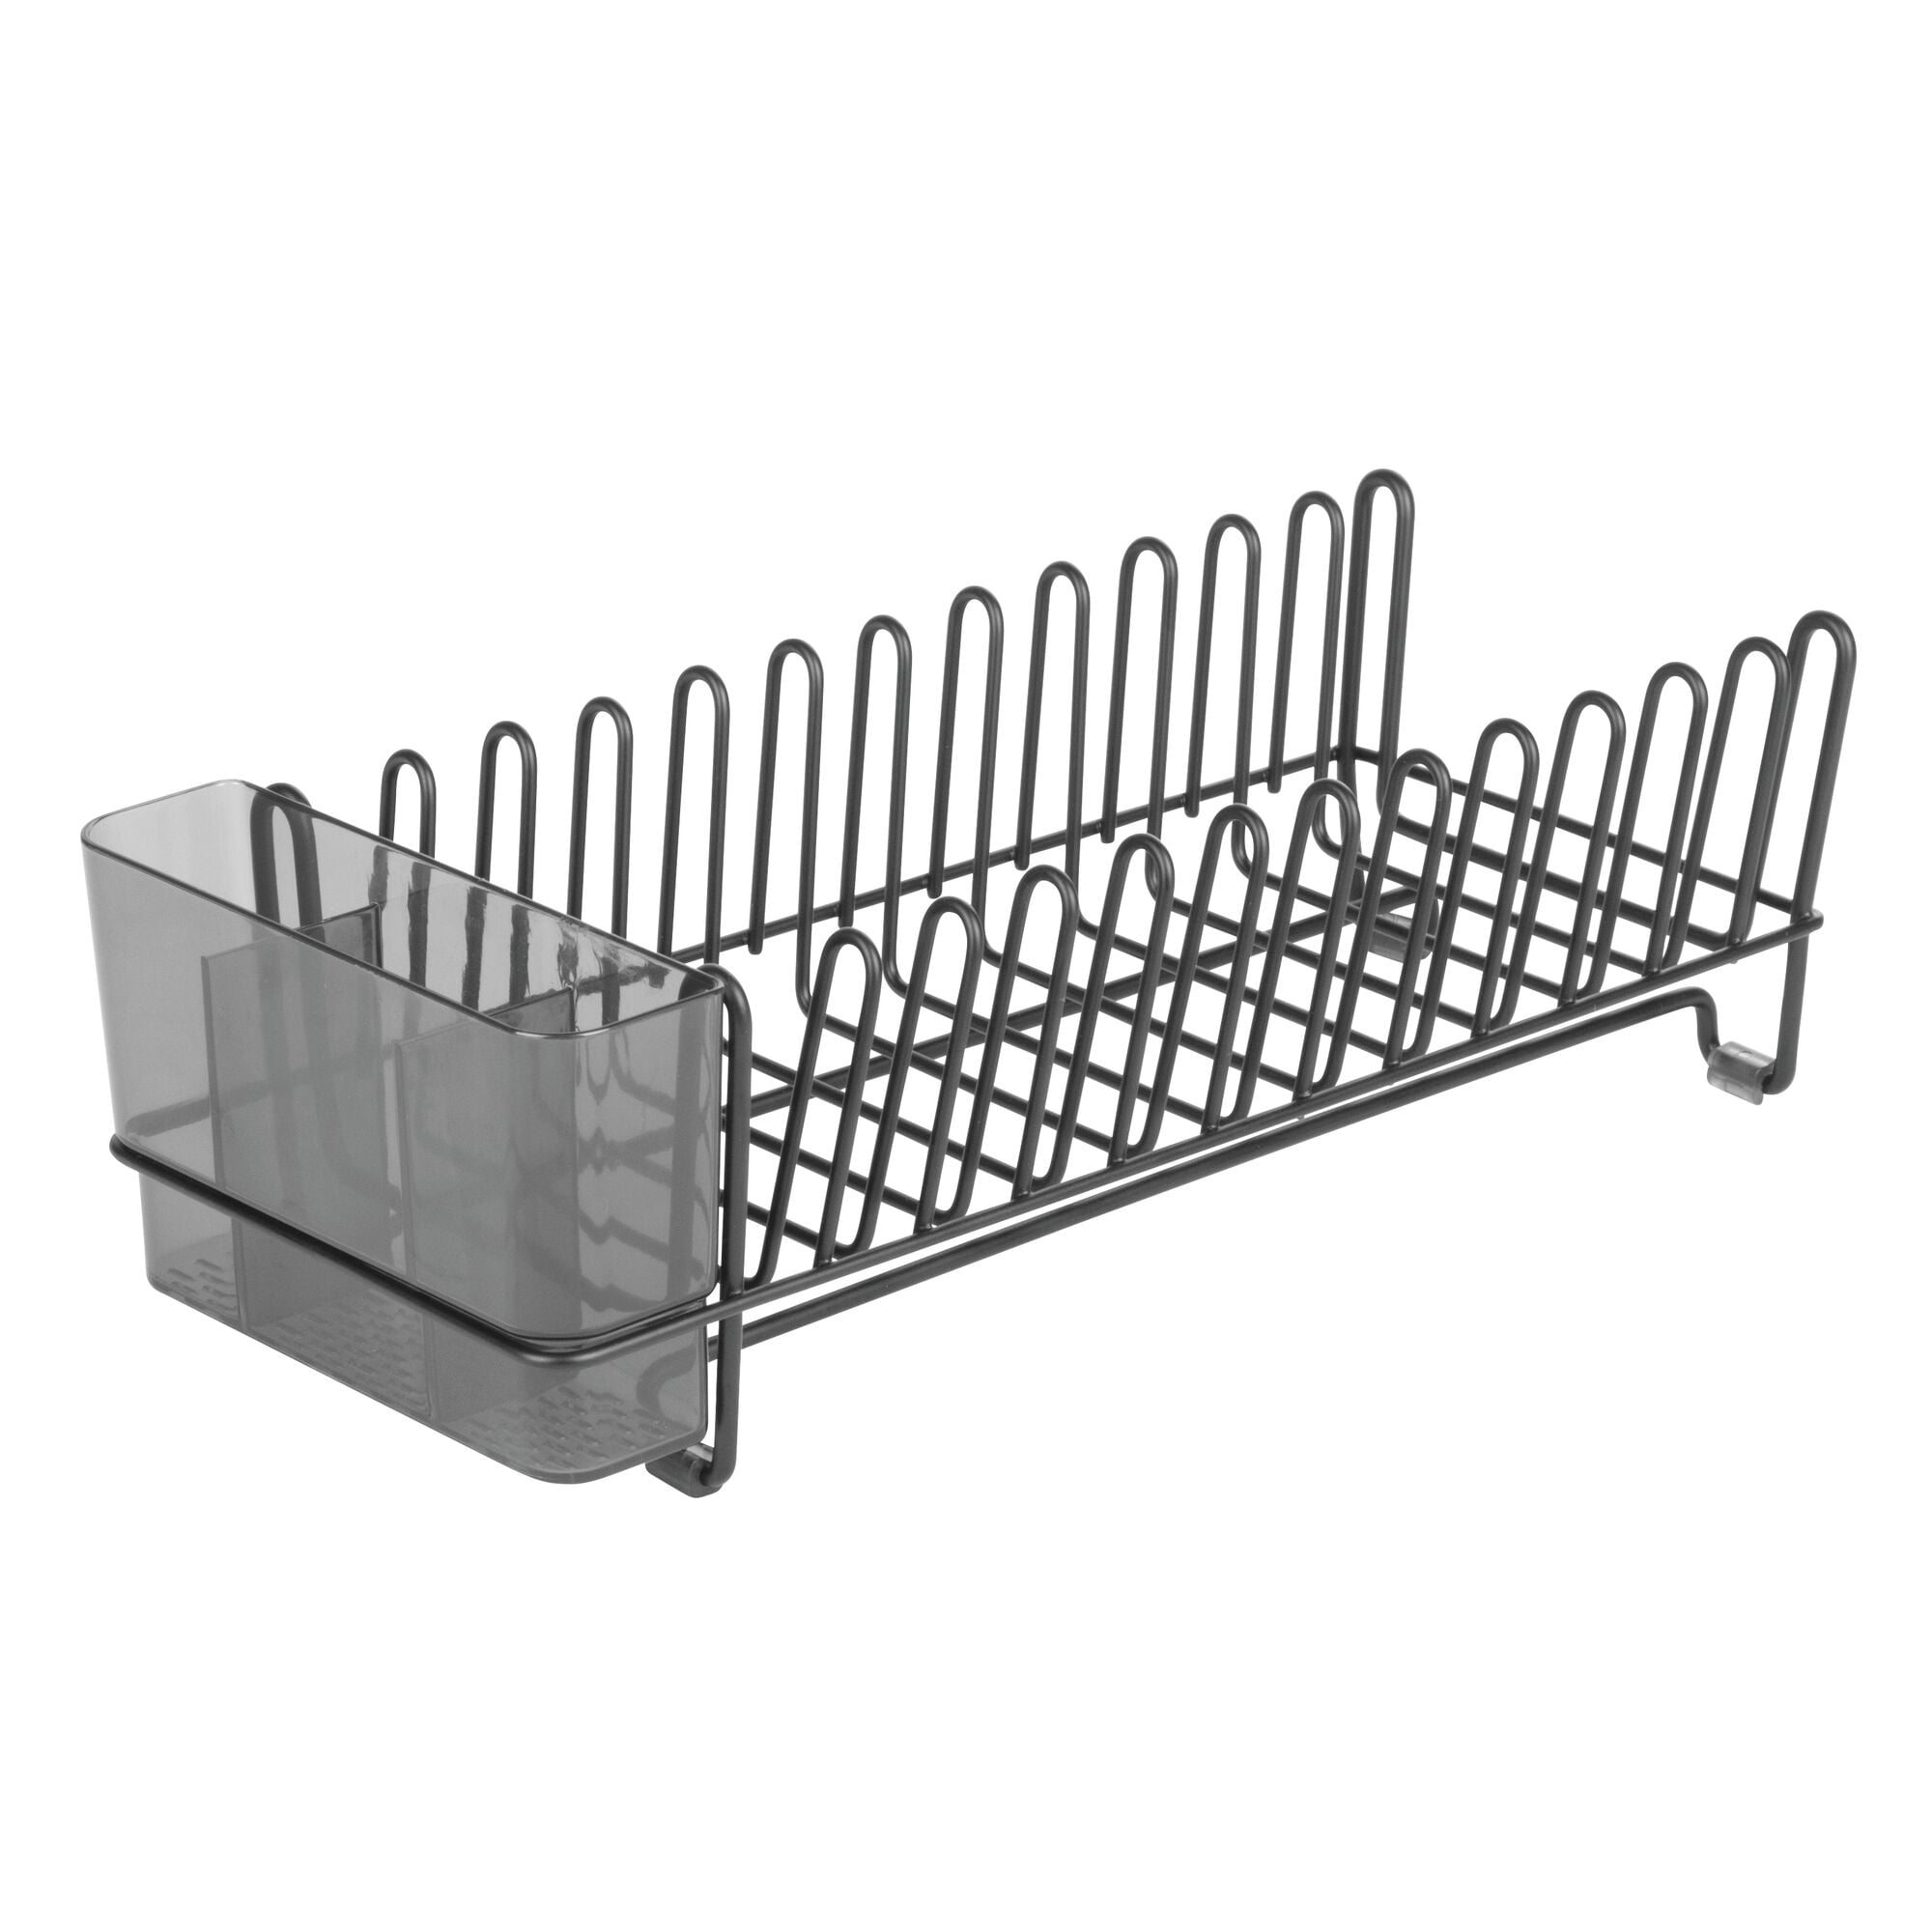  ORZ Dish Drying Rack, Dish Racks for Kitchen Counter, Small  Black Metal Dish Drainer, Compact Dish Drying Rack with Drainboard, Kitchen Drying  Rack for Dishes (Black 1 Tier)